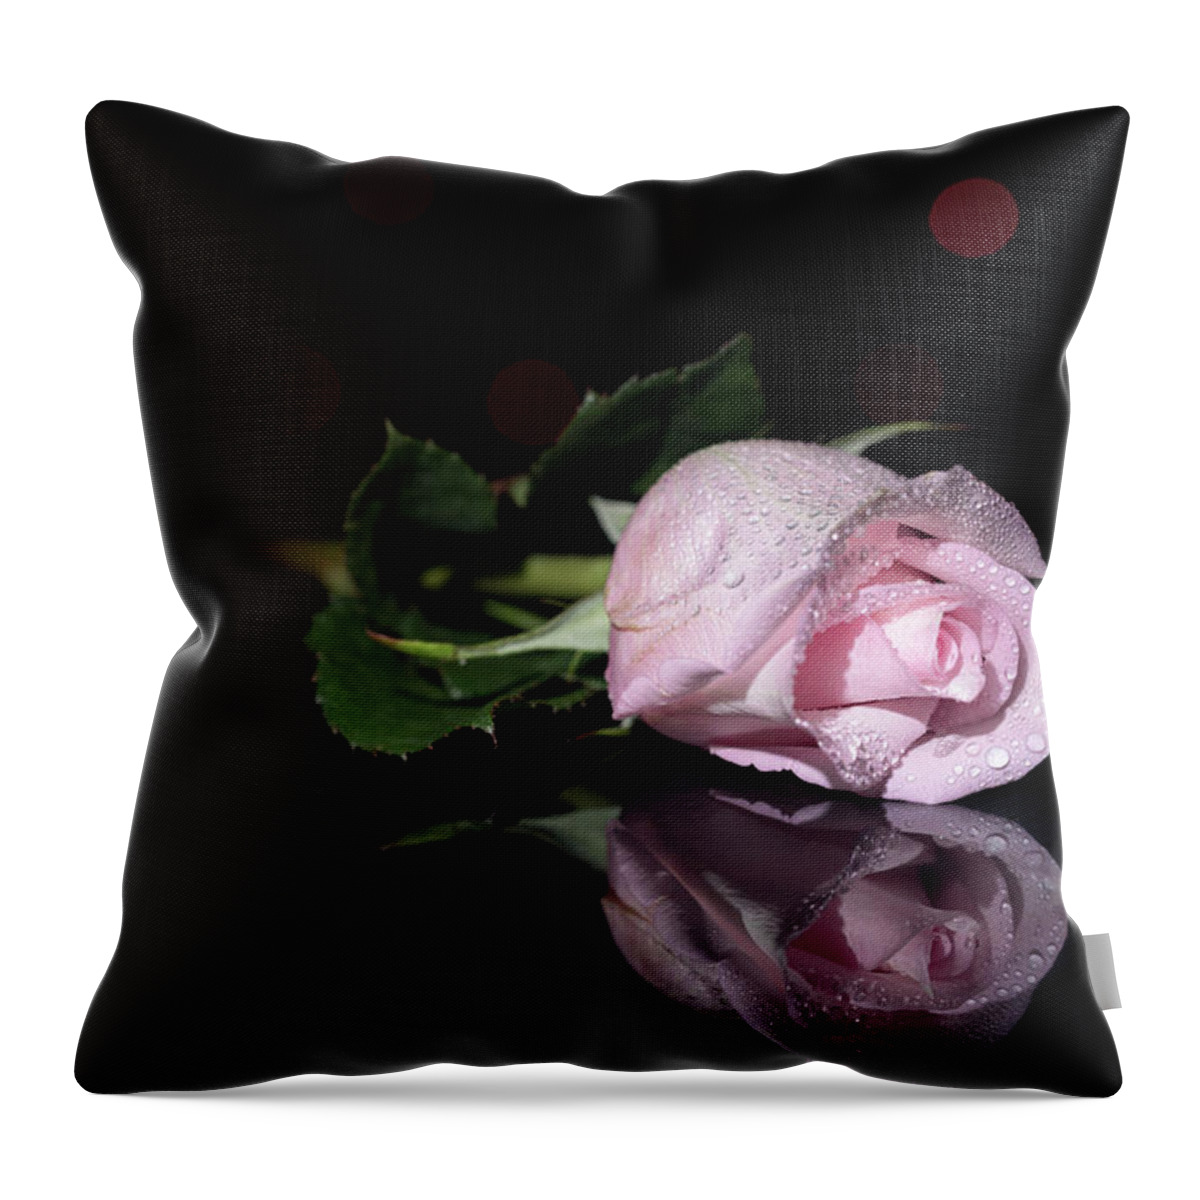 Rose Pose Flower Studio Reflection Water Dew Drop Drops Bokeh Floral Staging Botany Throw Pillow featuring the photograph Rose Pose by Brian Hale